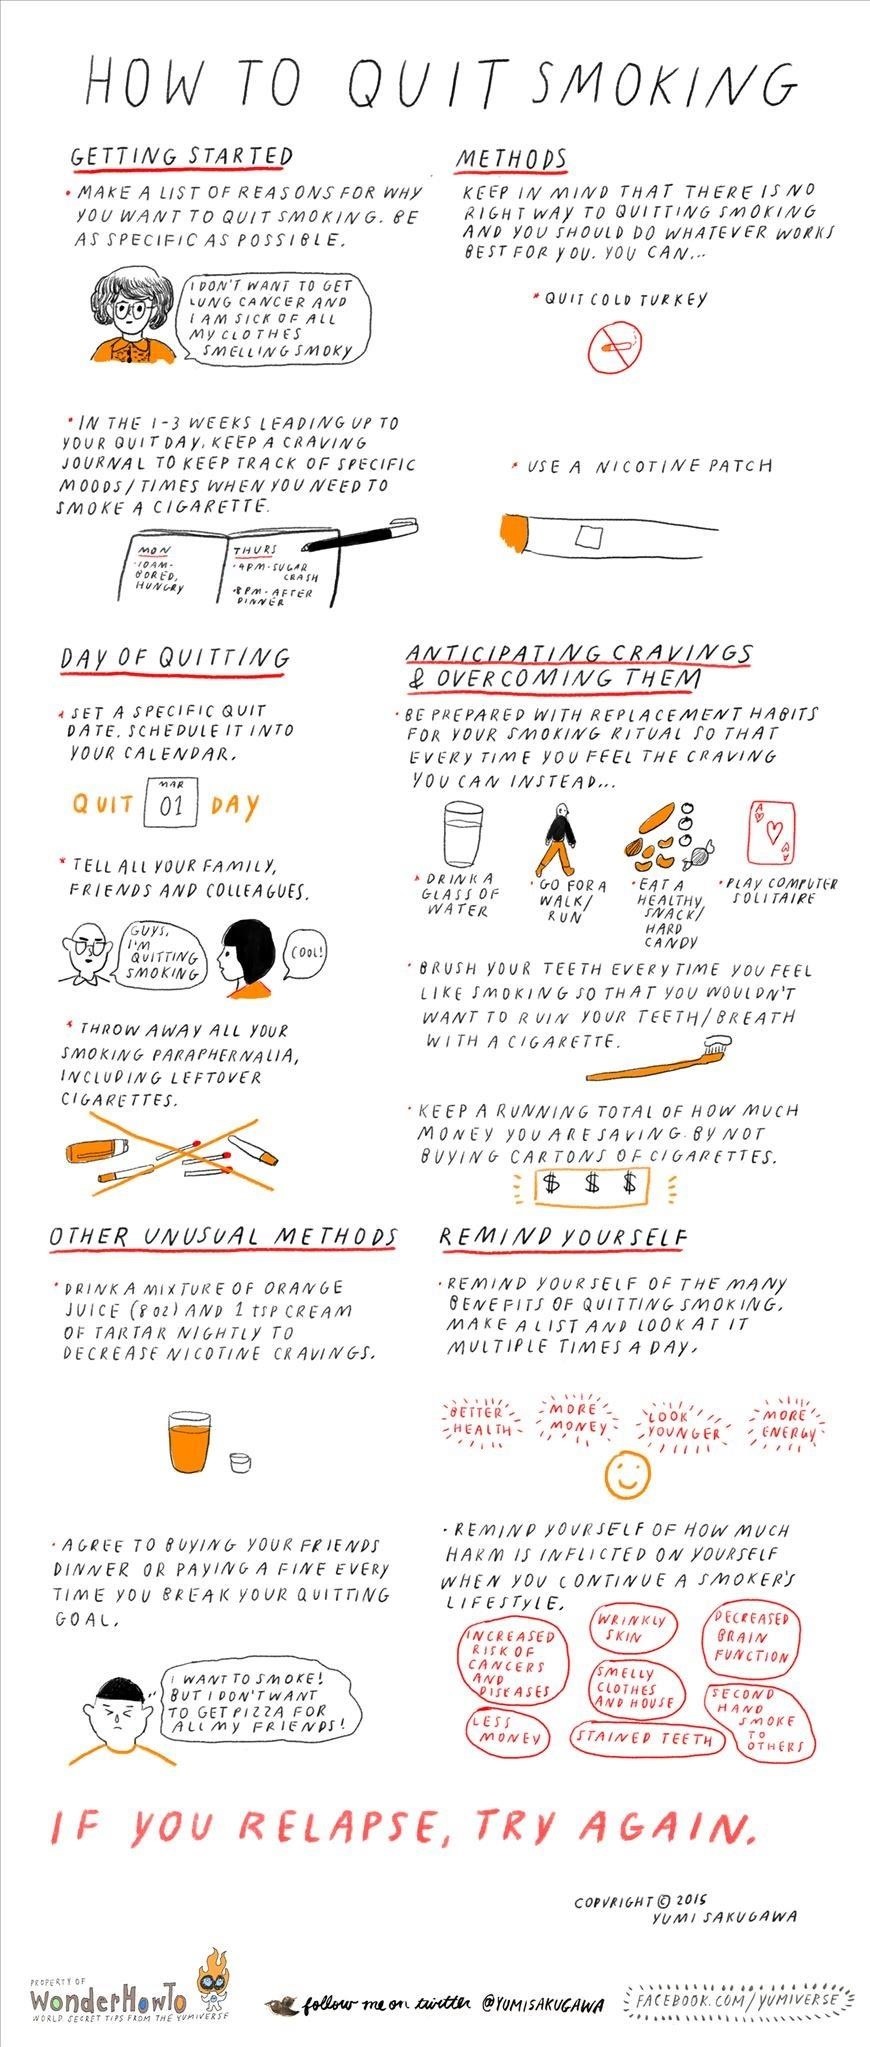 How to Quit Smoking: An Illustrated Guide